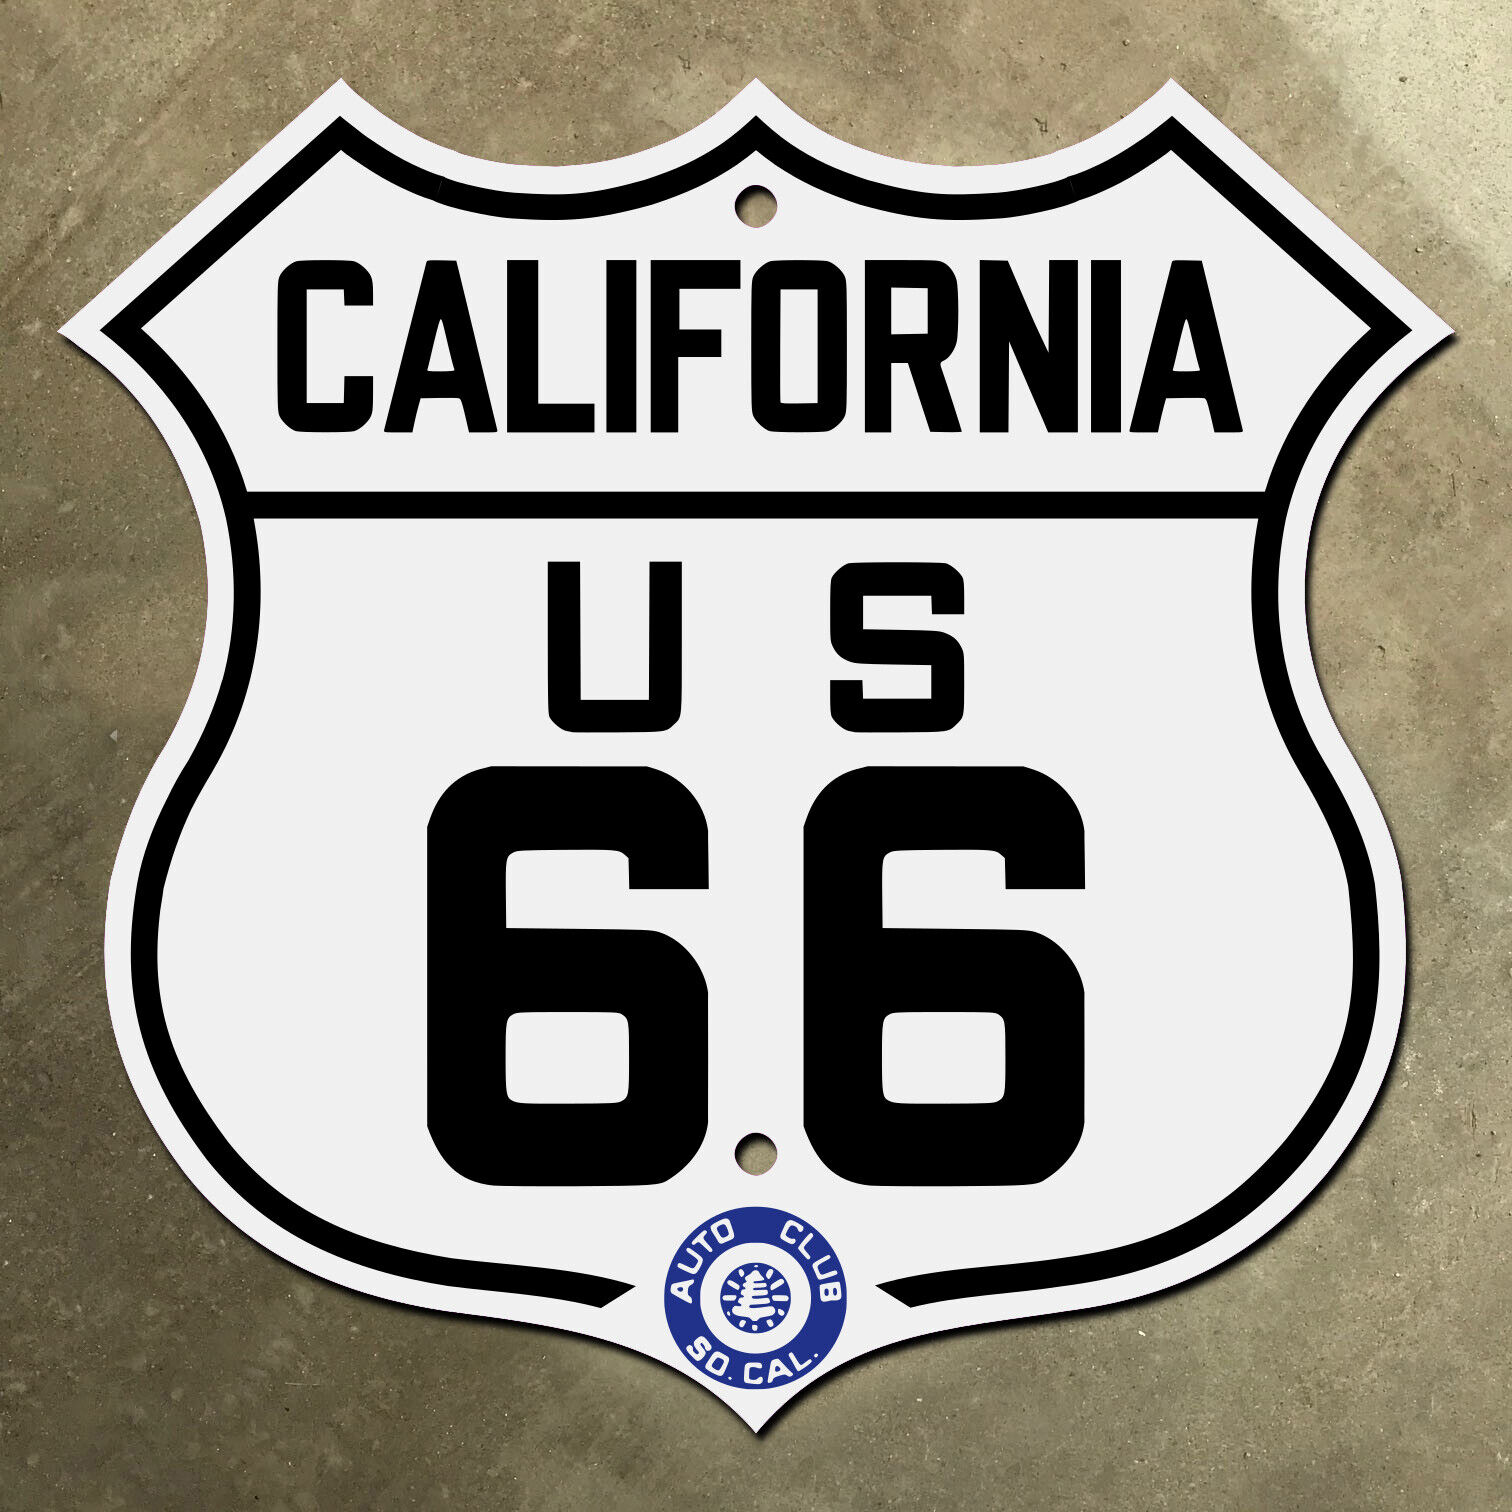 California ACSC US route 66 highway road sign auto club AAA mother road 1928